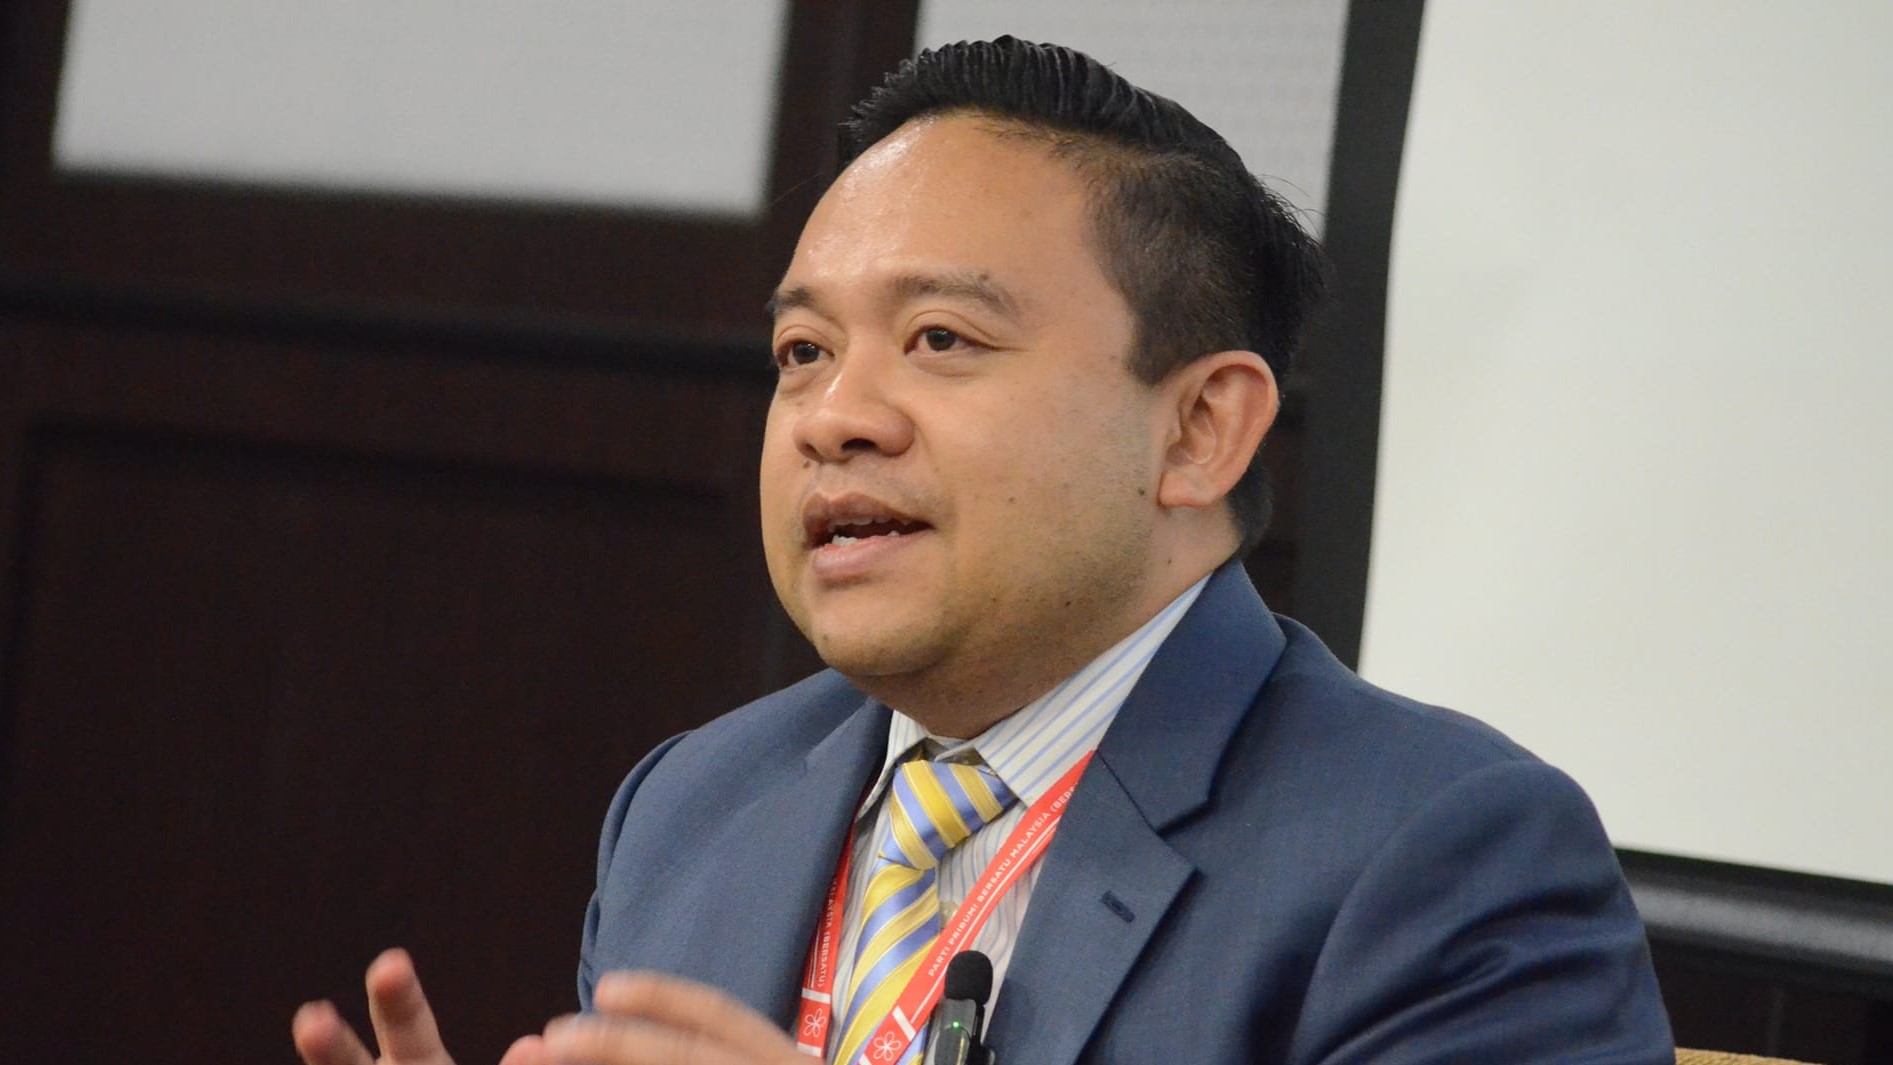 Ministers getting publicly drunk is unbecoming, regardless of religion: Wan Saiful